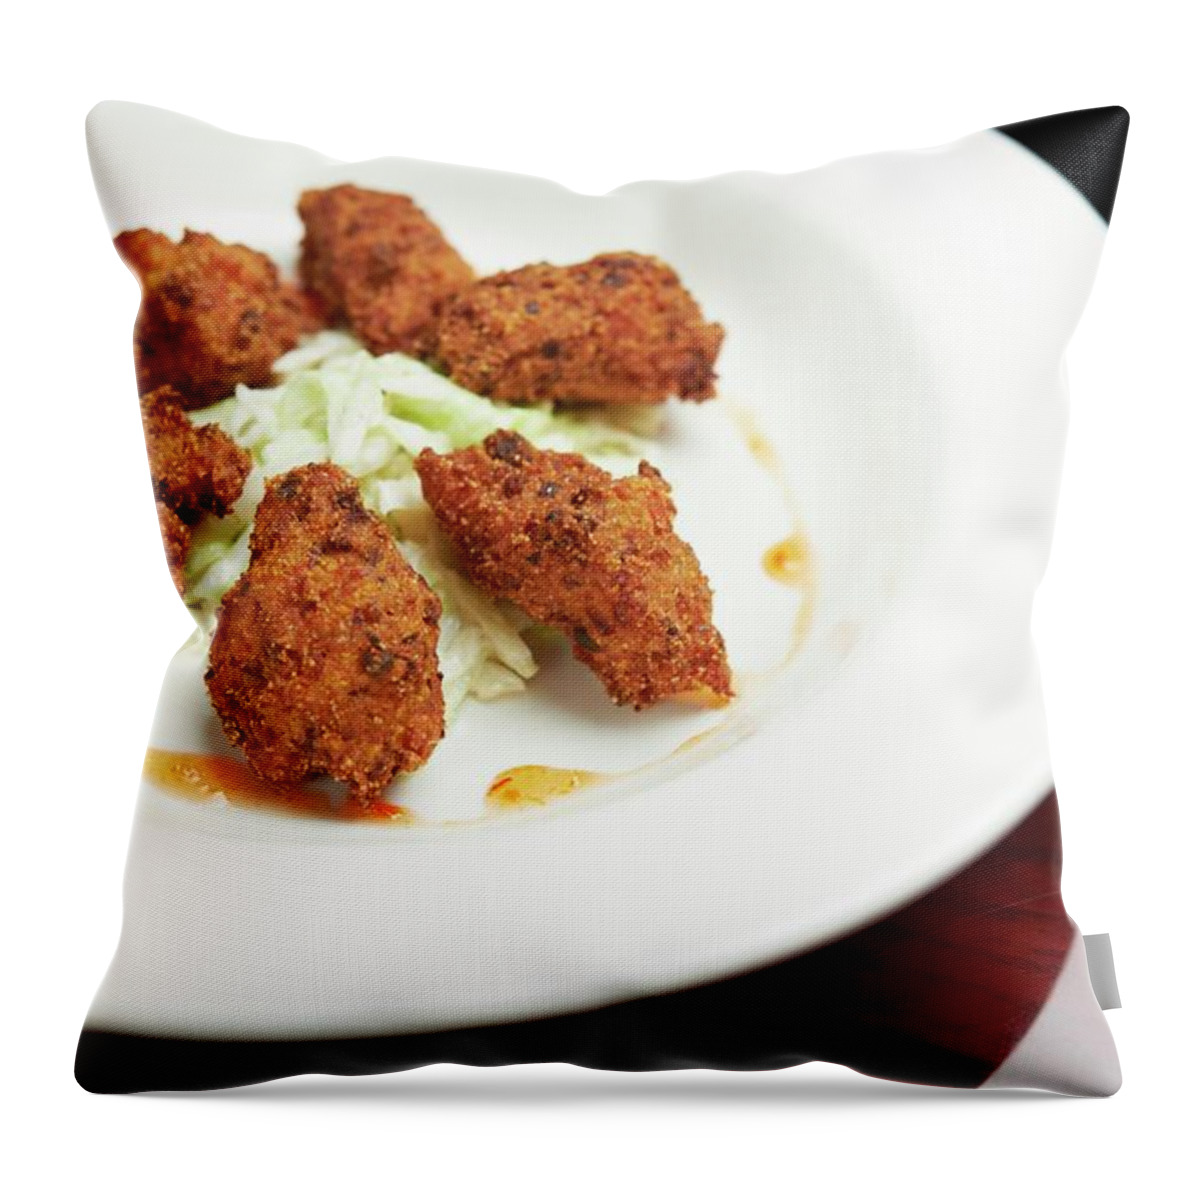 Ip_11180253 Throw Pillow featuring the photograph Fried Alligator Nuggets With Louisiana Hot Sauce And Slaw by Rannells, Greg